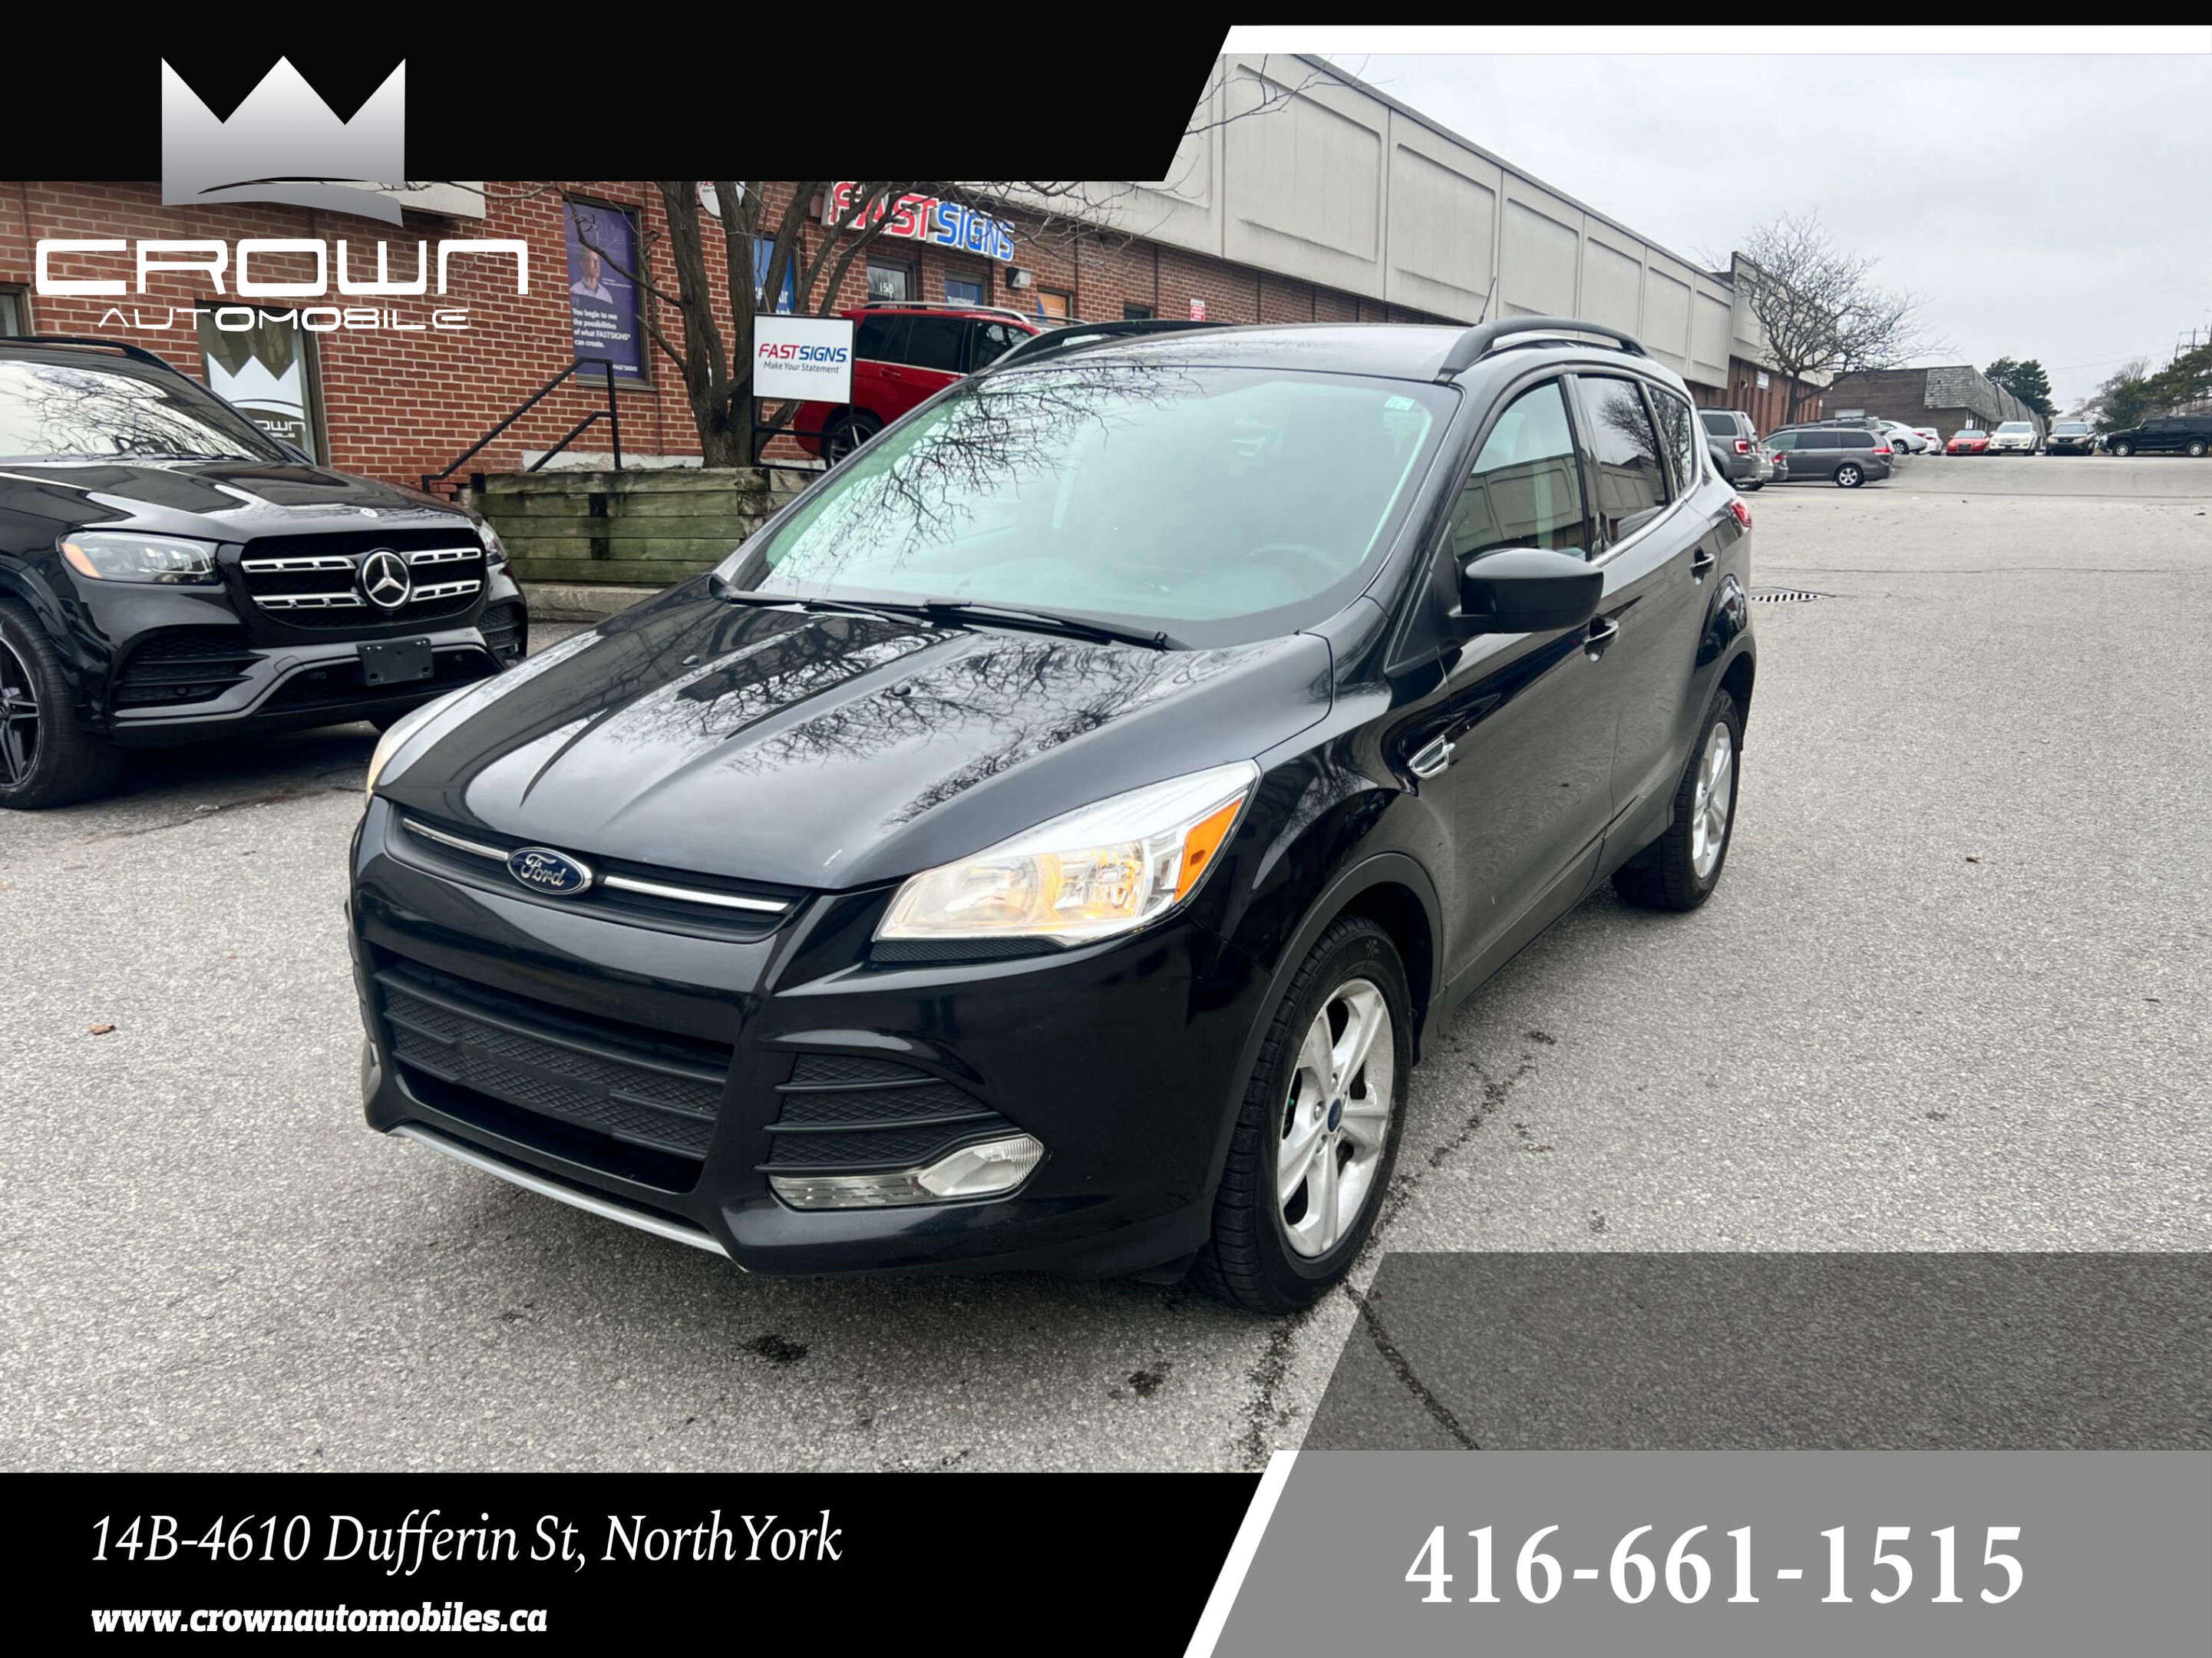 2014 Ford Escape 4WD 4dr SE, NO ACCIDENT, REAR VIEW CAMERA, HEATED 